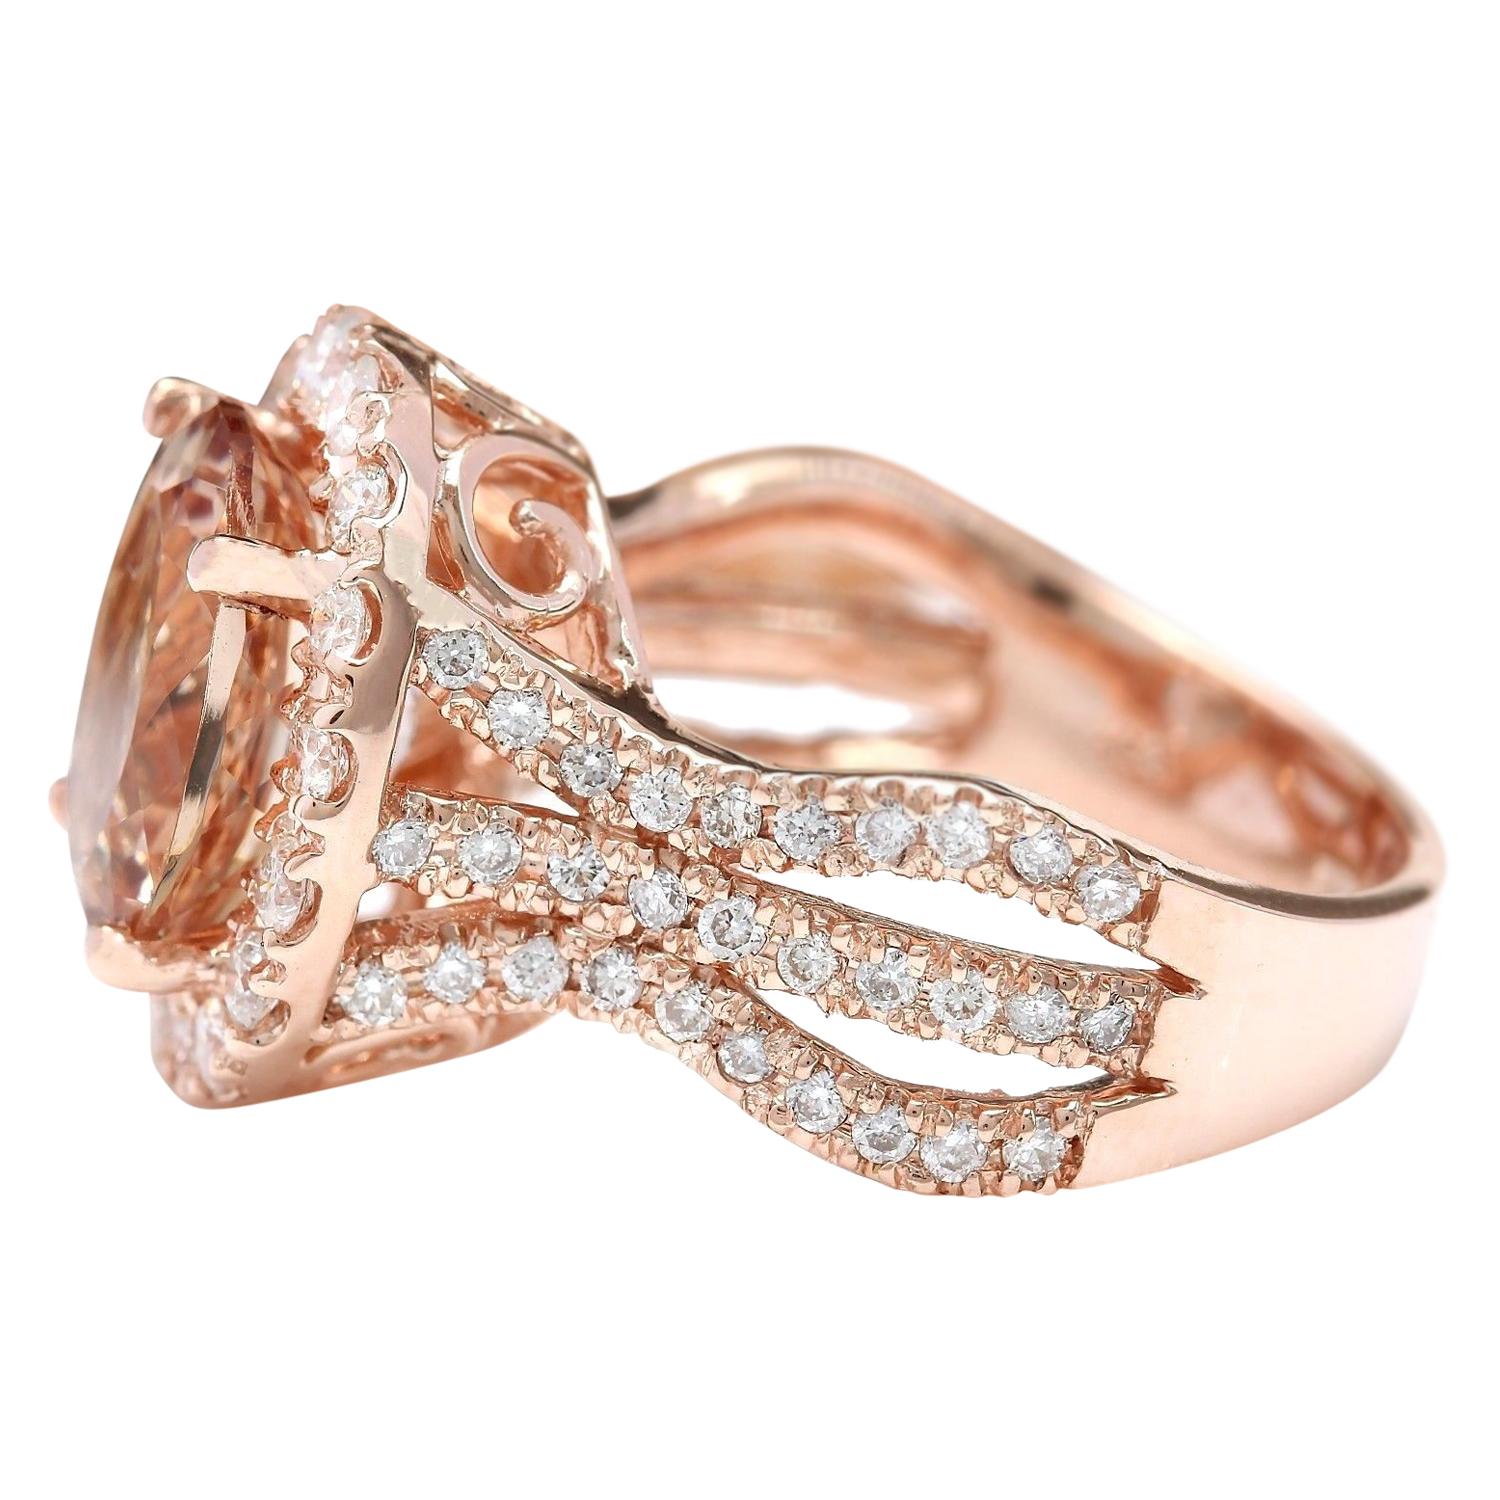 5.29 Carat Natural Morganite 18 Karat Solid Rose Gold Diamond Ring In New Condition For Sale In Los Angeles, CA